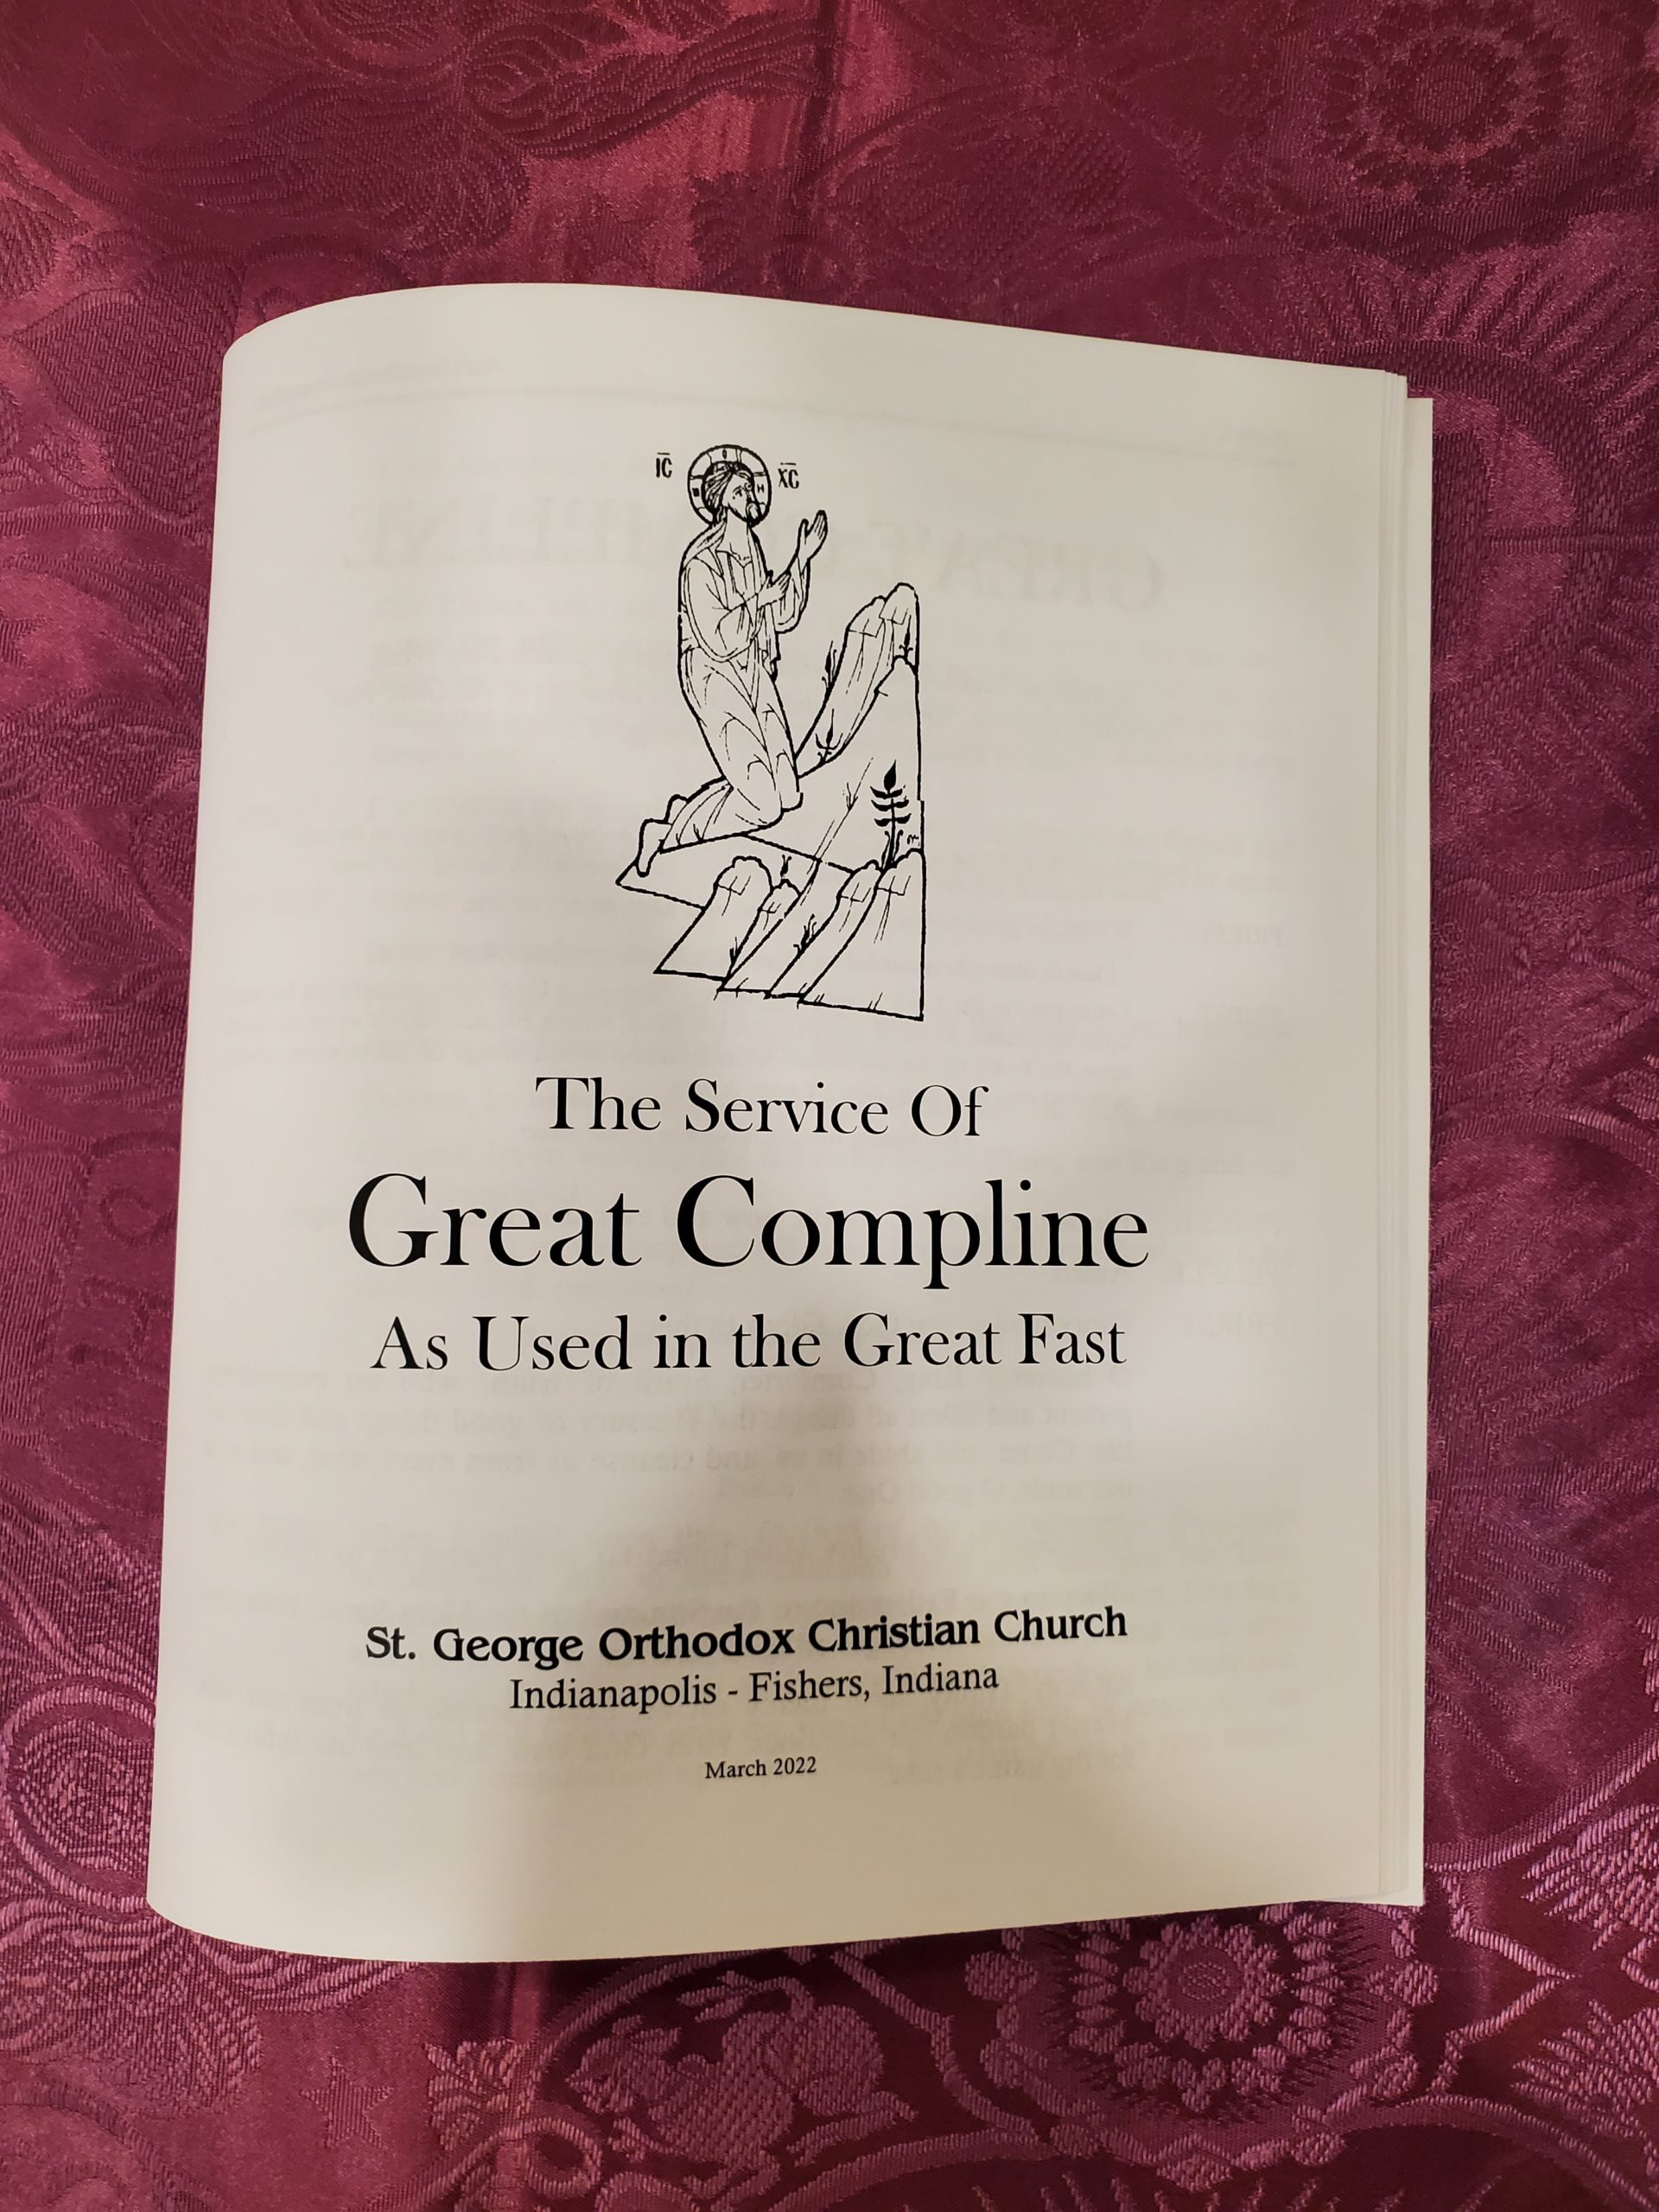 https://www.stgindy.org/wp-content/uploads/2022/03/Great-Compline-scaled.jpg